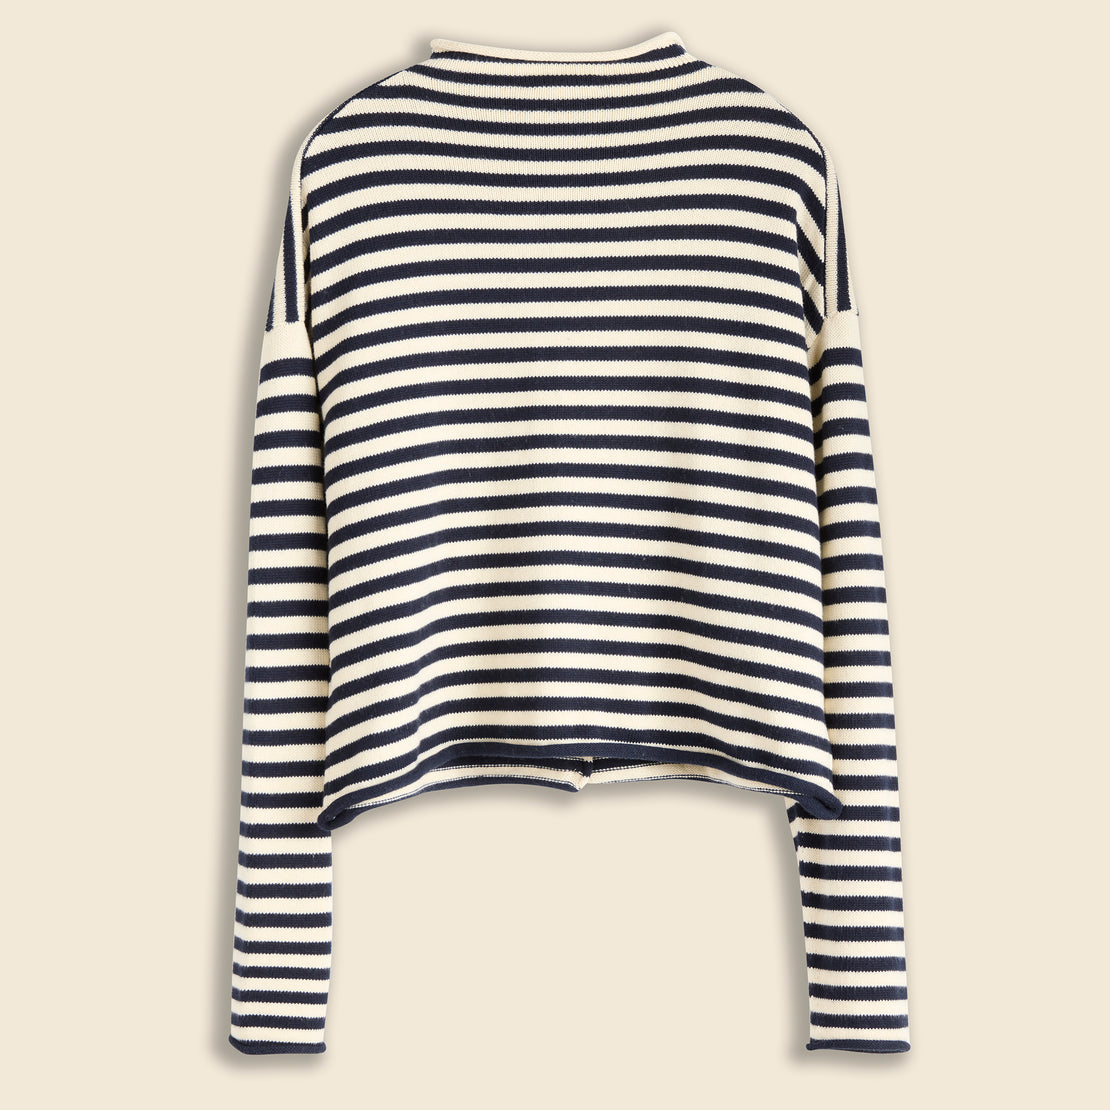 Taylor Cardigan in Striped Cotton Cashmere Blend - Navy/Ivory Stripe - Alex Mill - STAG Provisions - W - Tops - Sweater